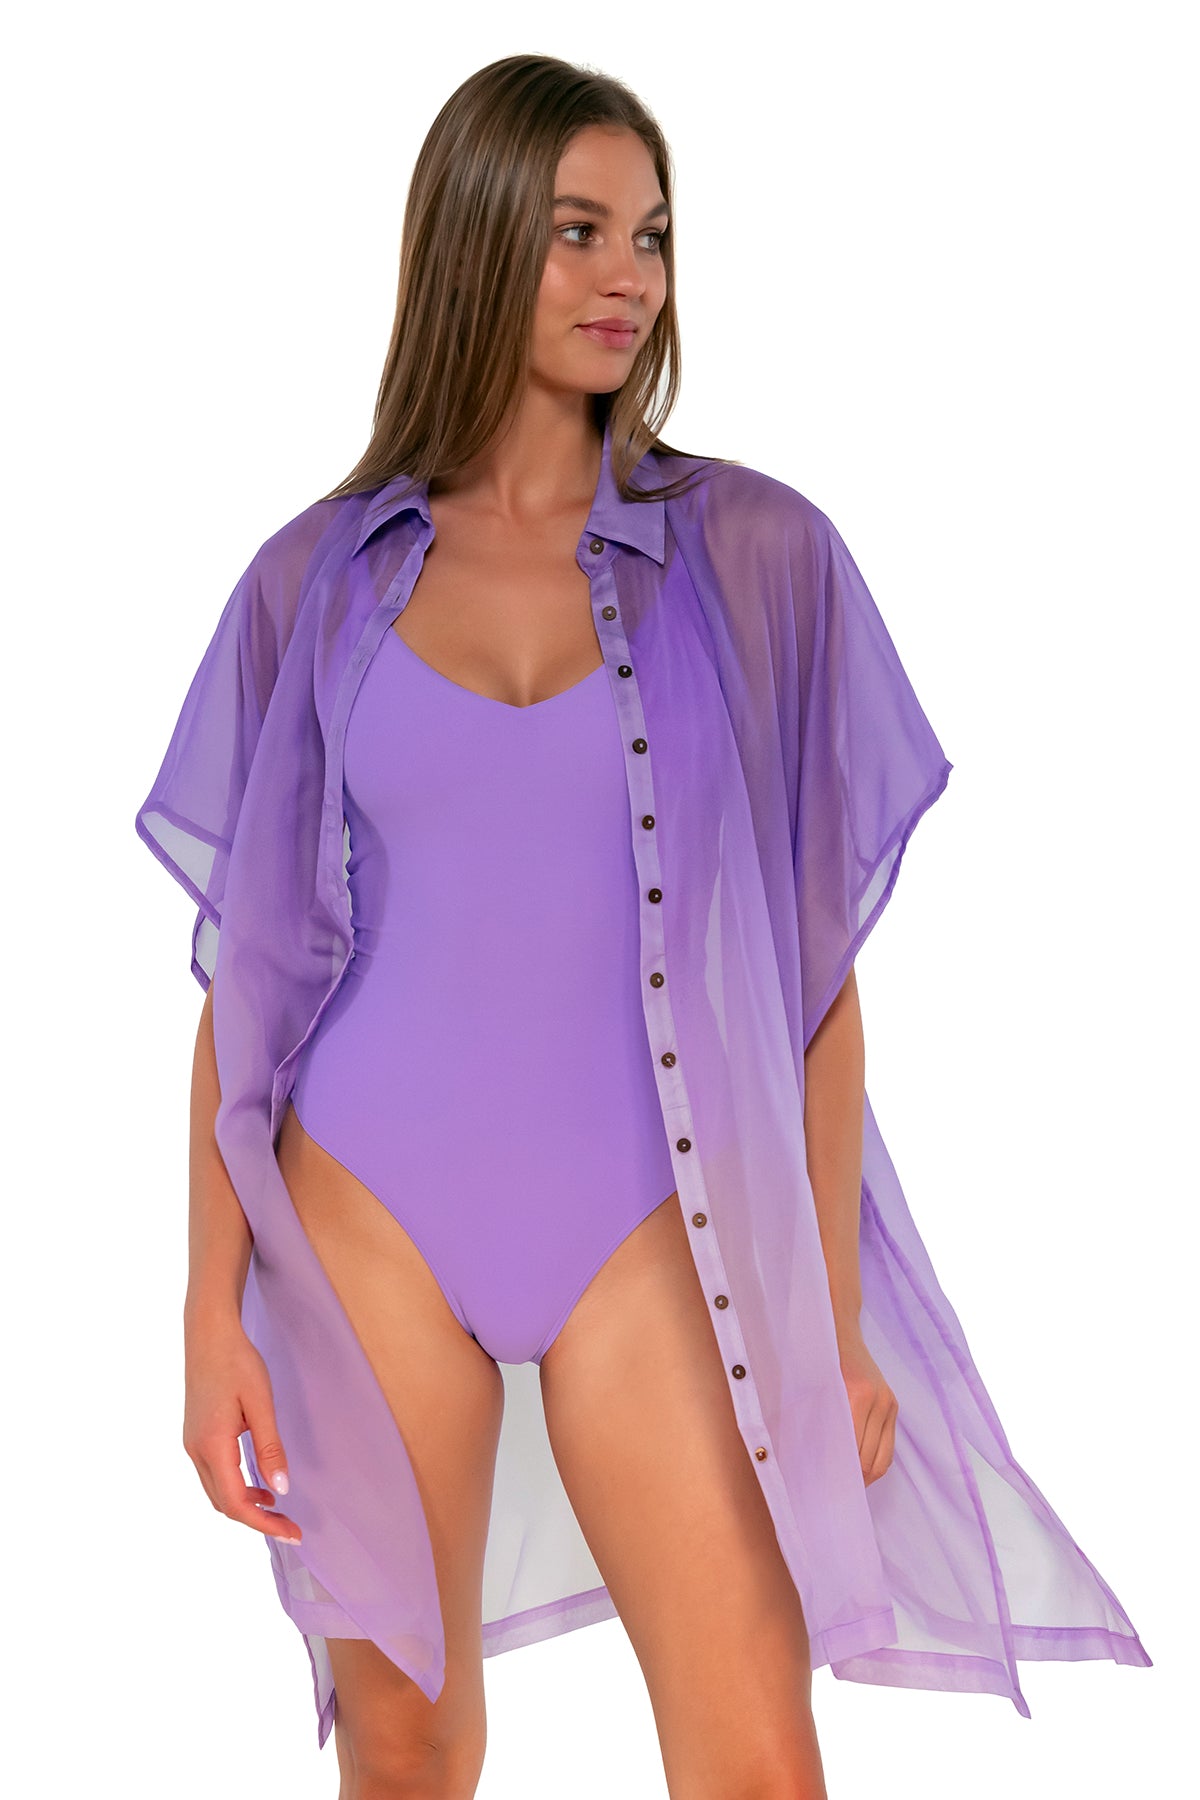 Front view of Sunsets Passion Flower Shore Thing Tunic worn as an open shirt